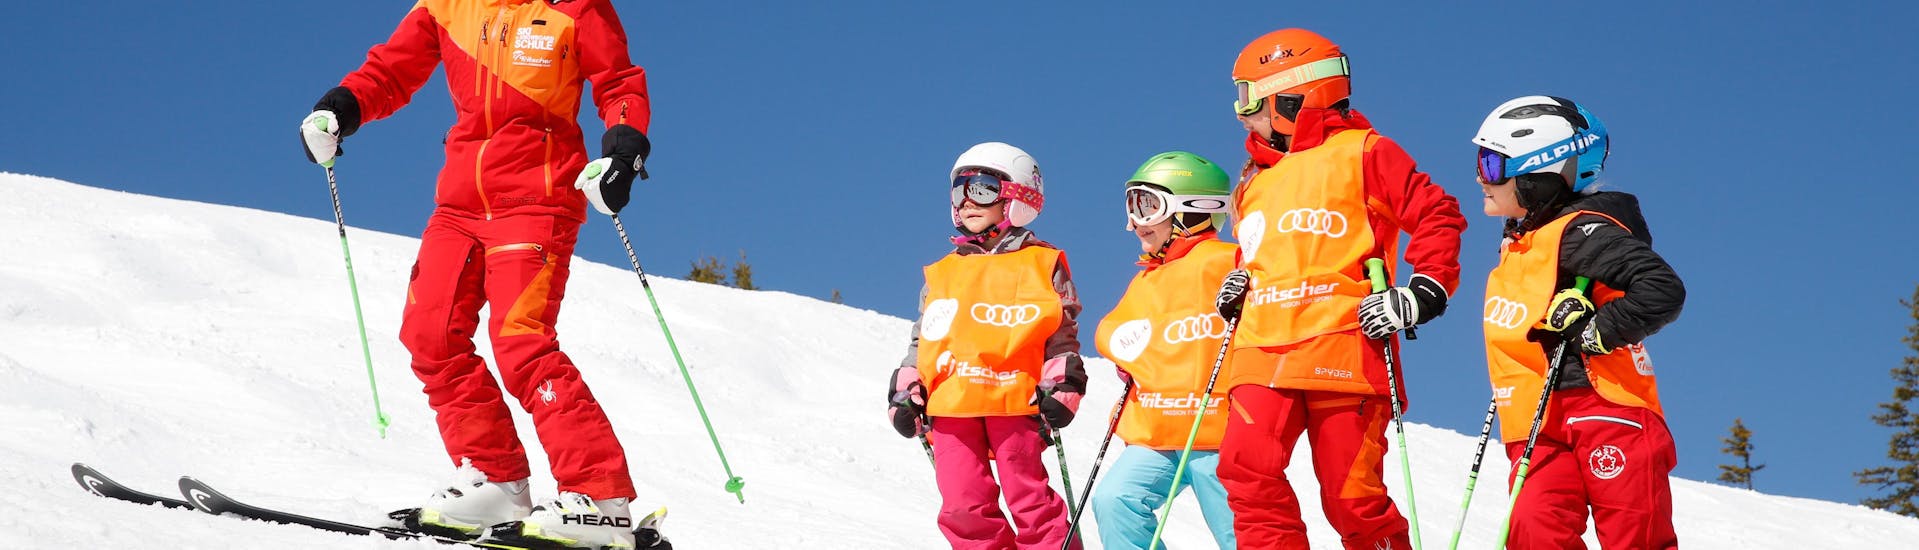 Kids Ski Lessons &quot;Miniclub&quot; (3-4 y.) in Rohrmoos with Ski School Tritscher Schladming - Hero image